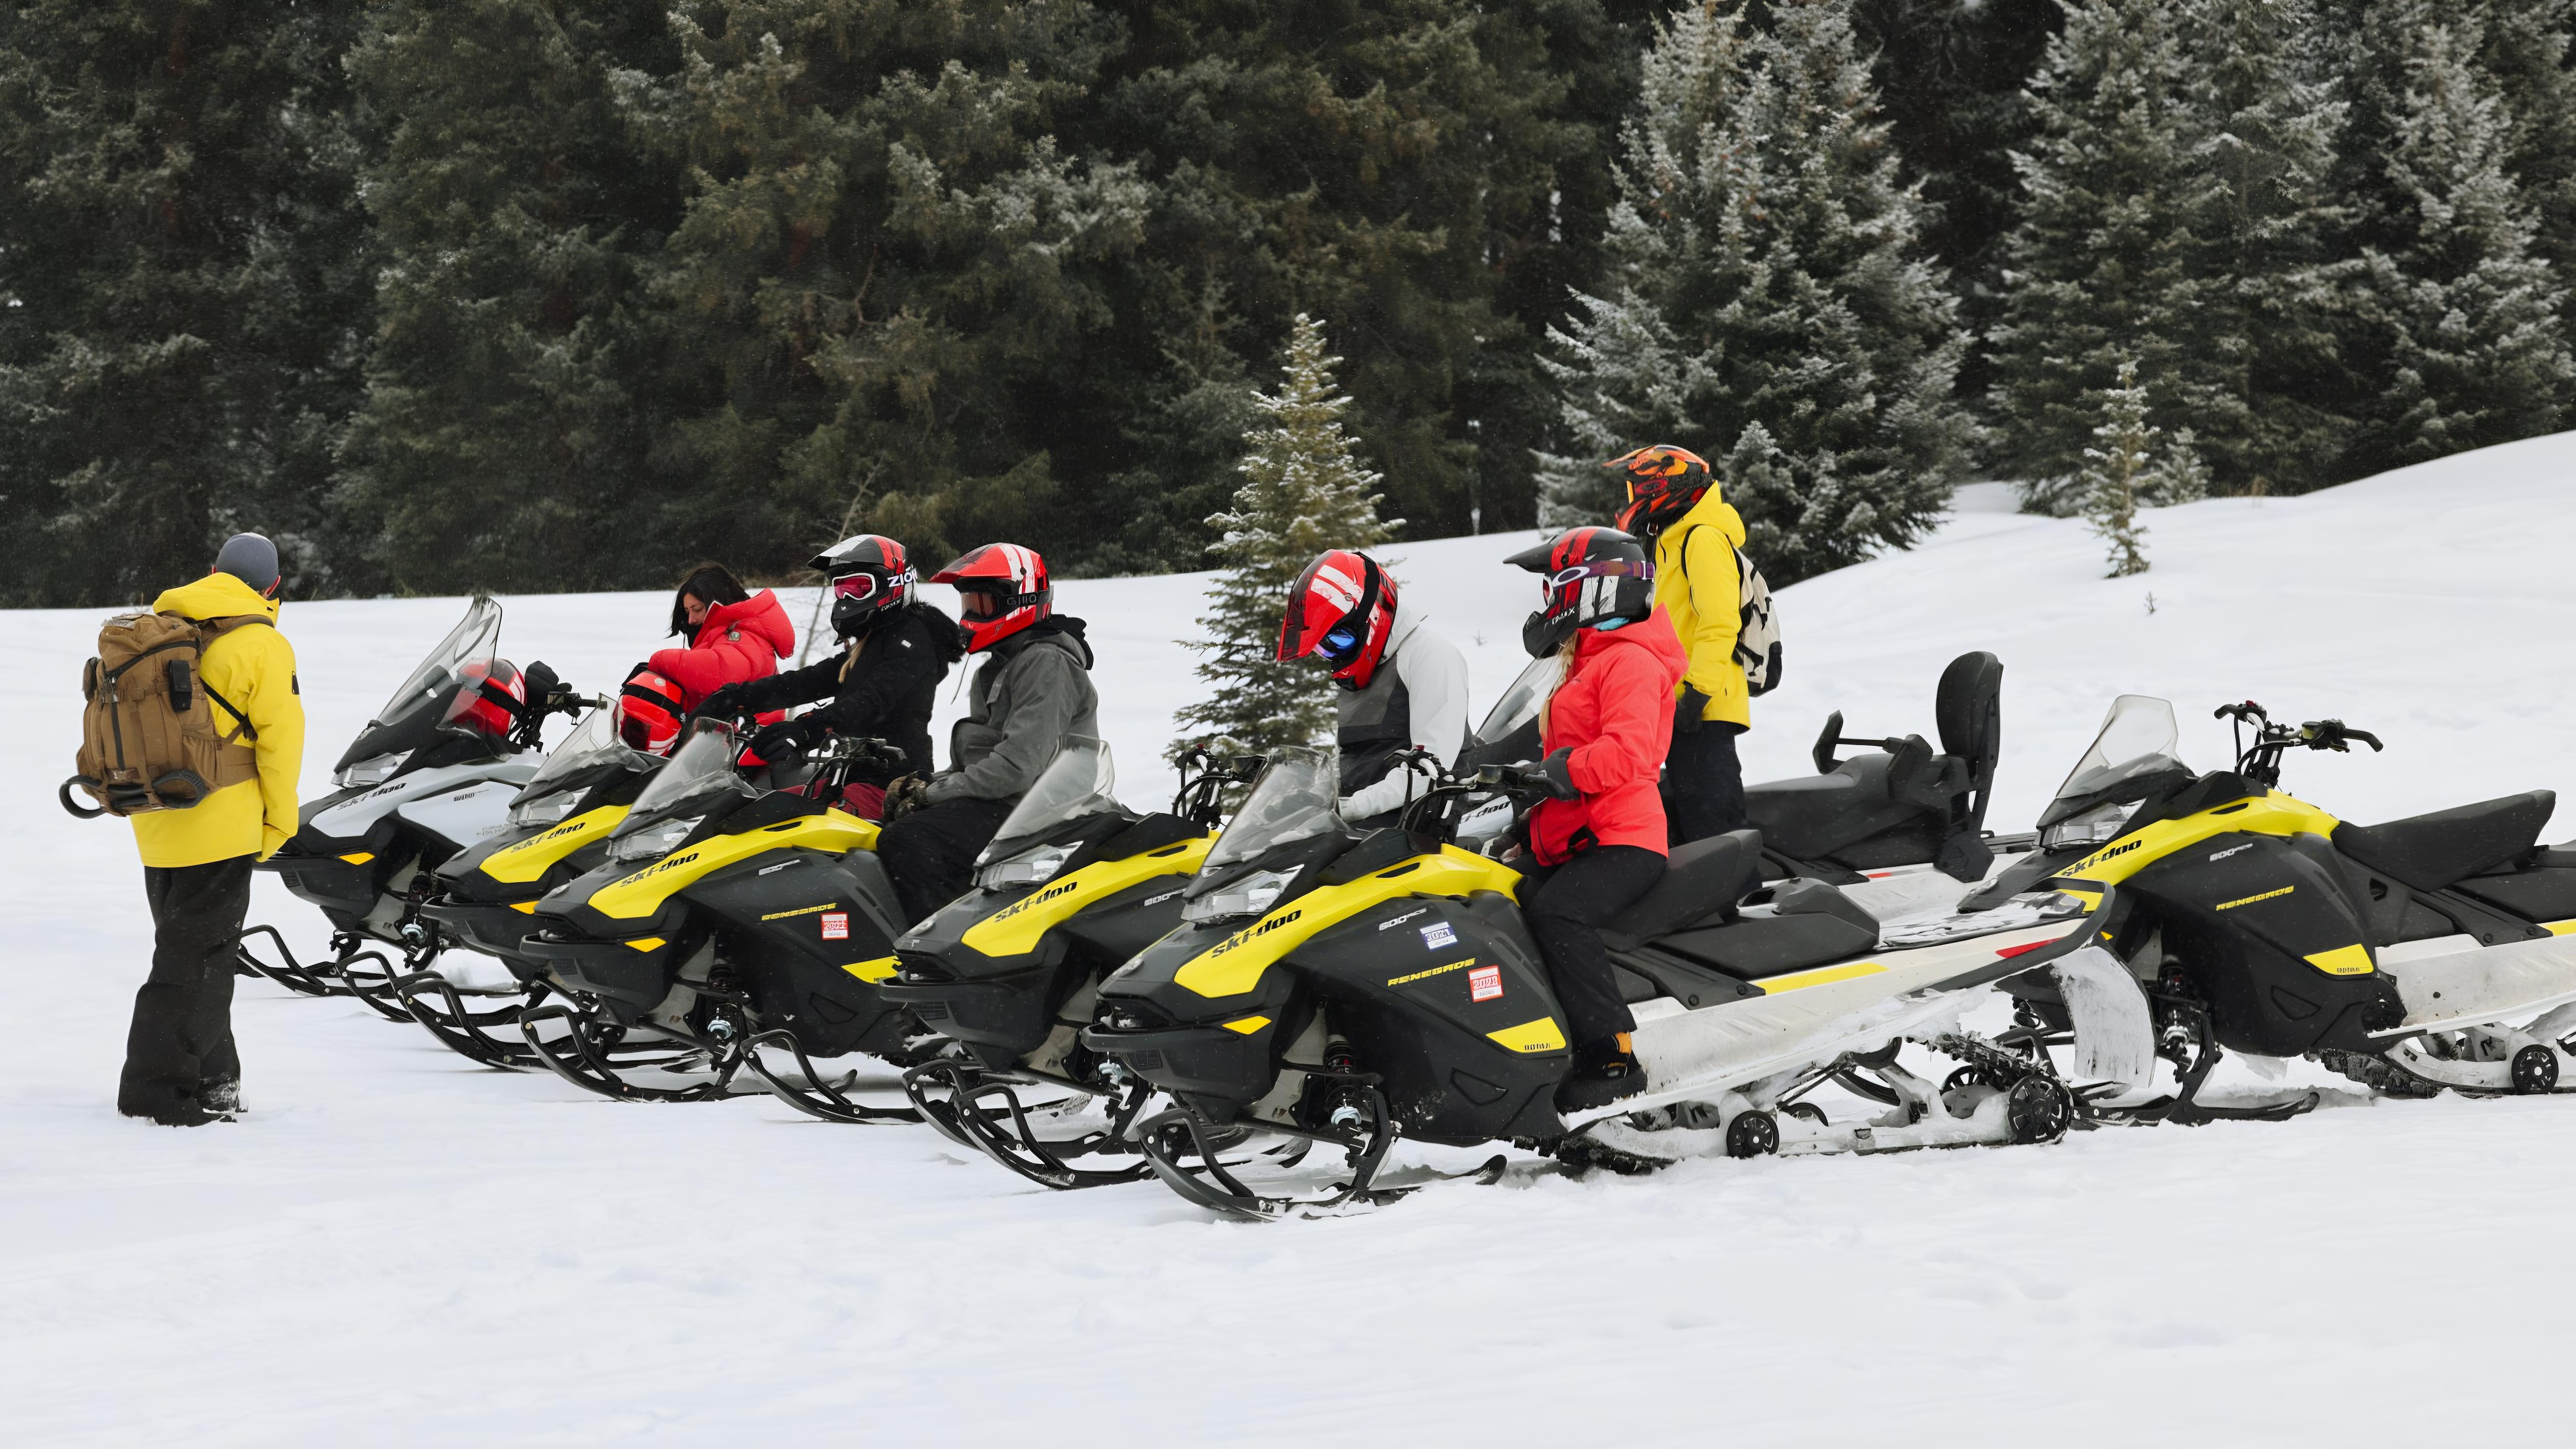 A snowmobile guide talking to riders on snowmobiles